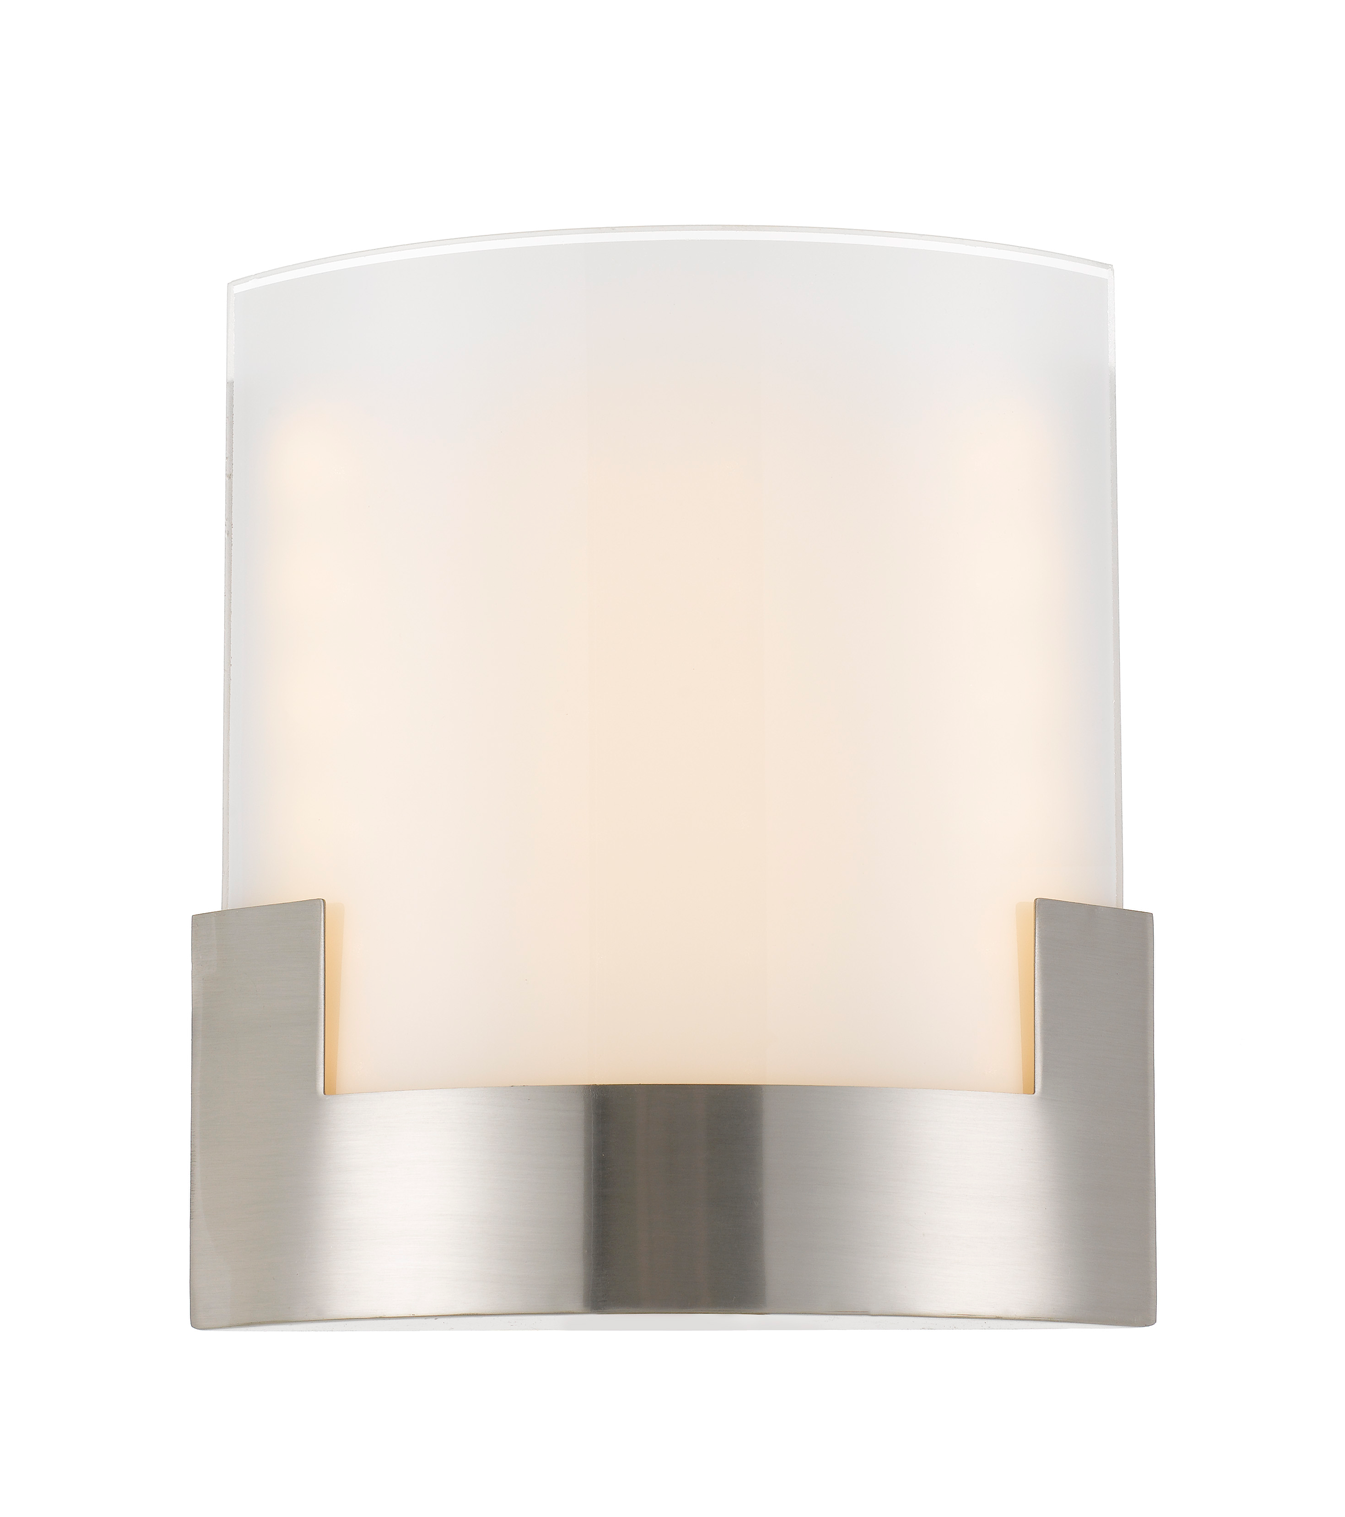 Solita 20cm Nickel Colour-changing LED Wall Sconce